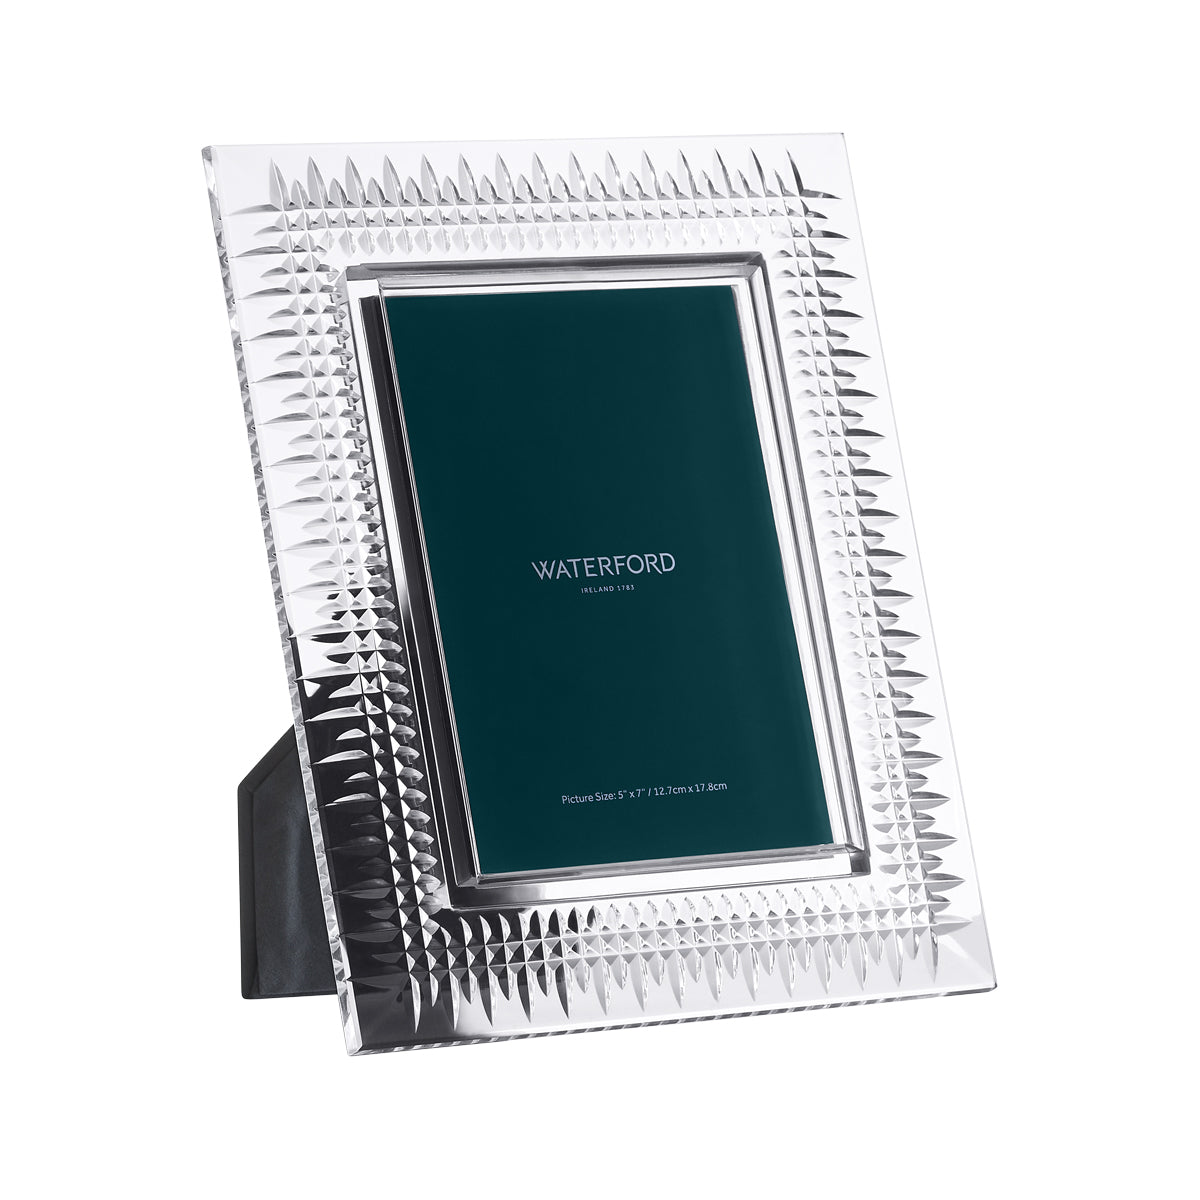 Waterford Lismore Diamond Picture Frame 5x7 (1065337)